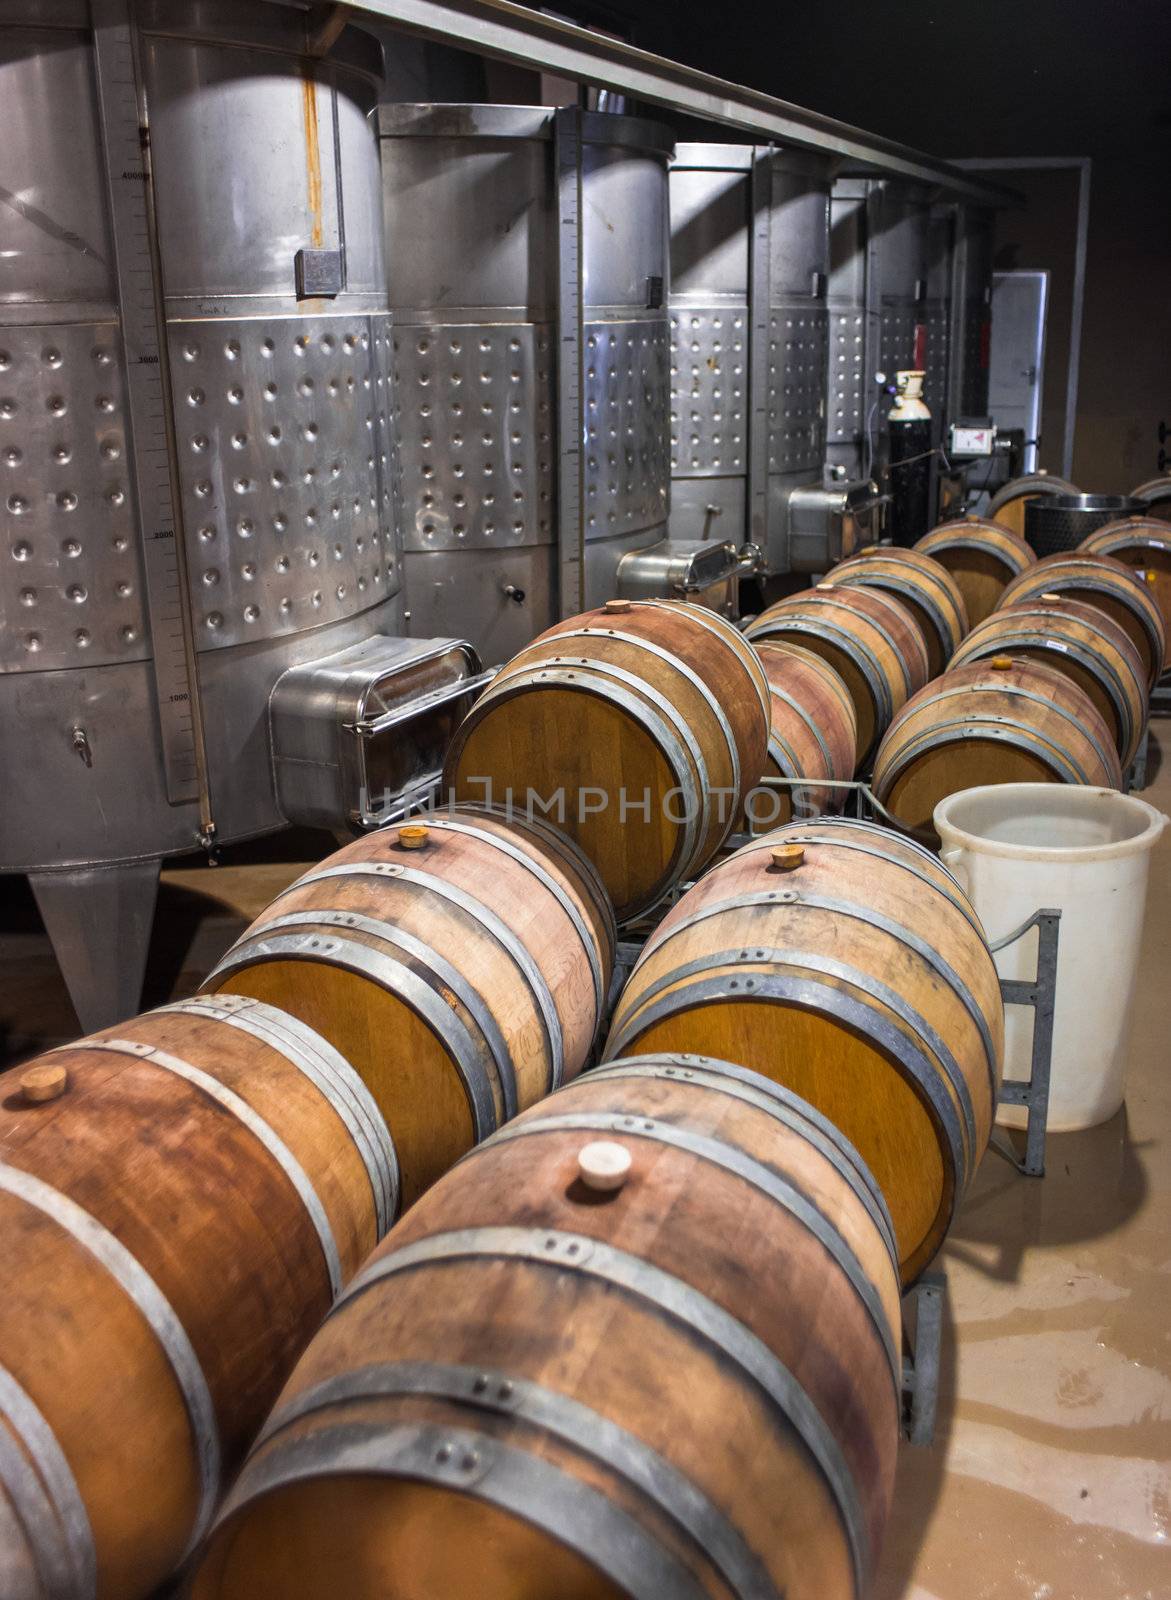 Barrels of South African wine by edan